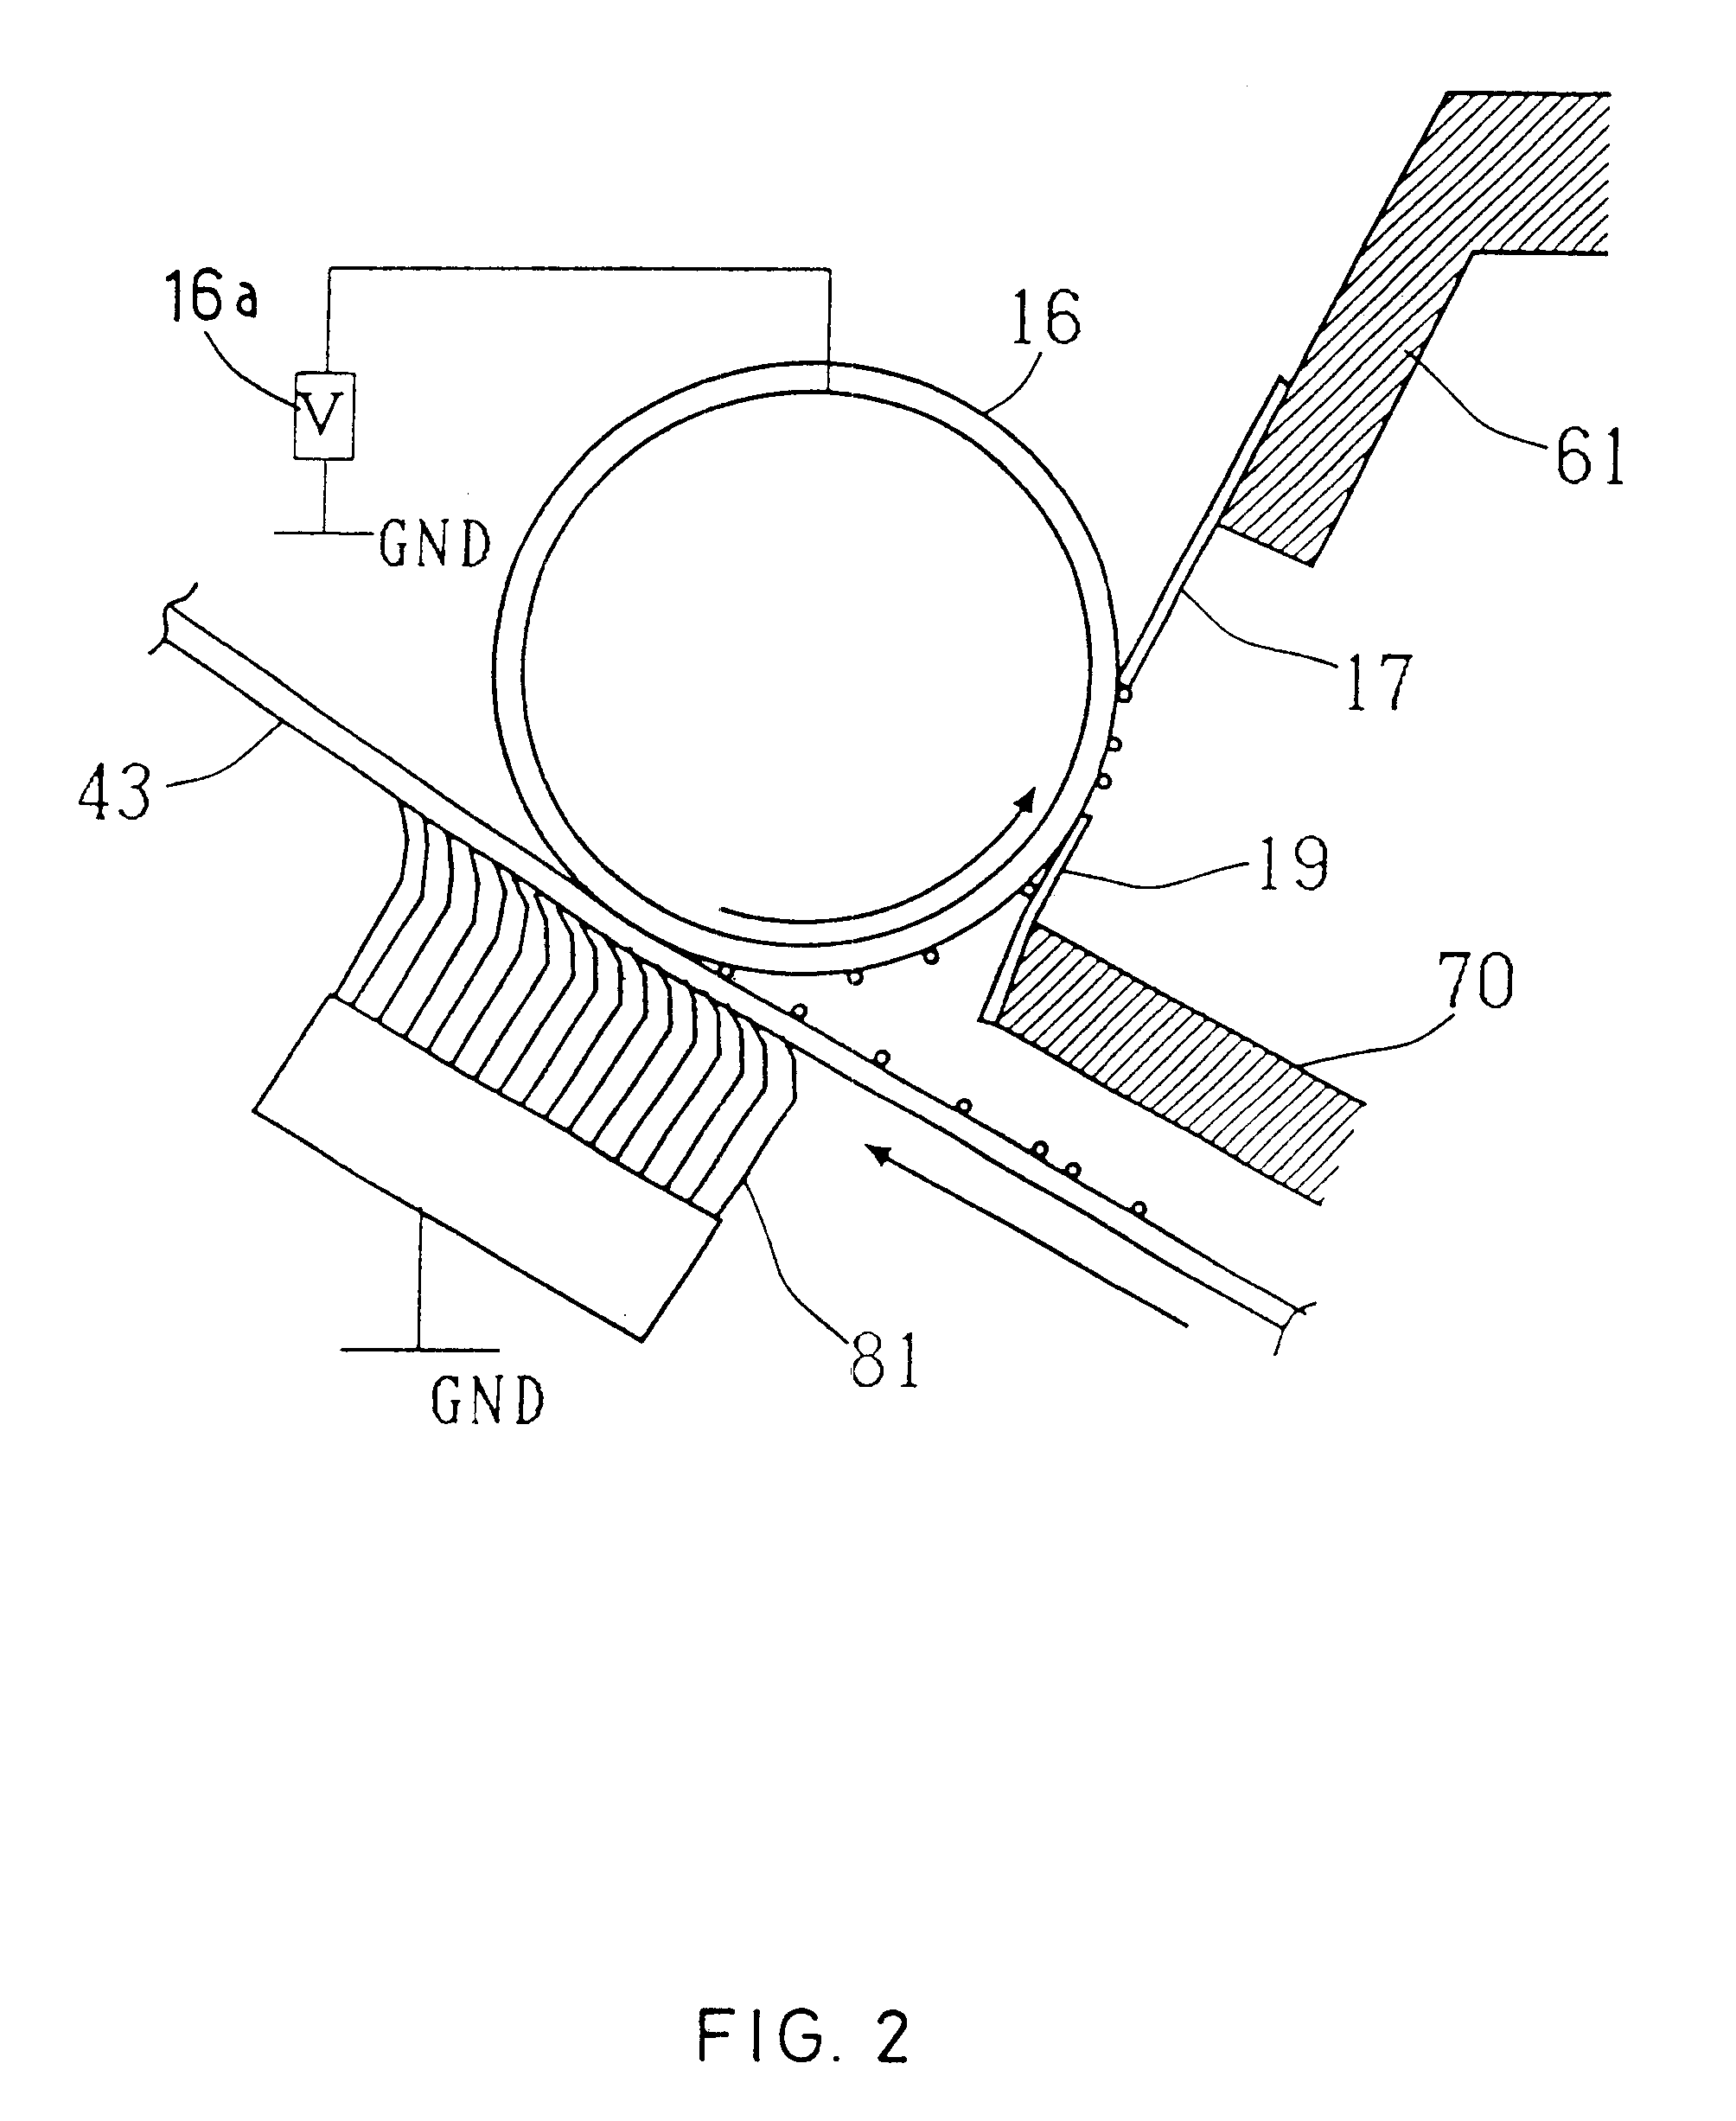 Image forming apparatus, transfer belt unit, cleaning device and cleaner unit used for image forming apparatus